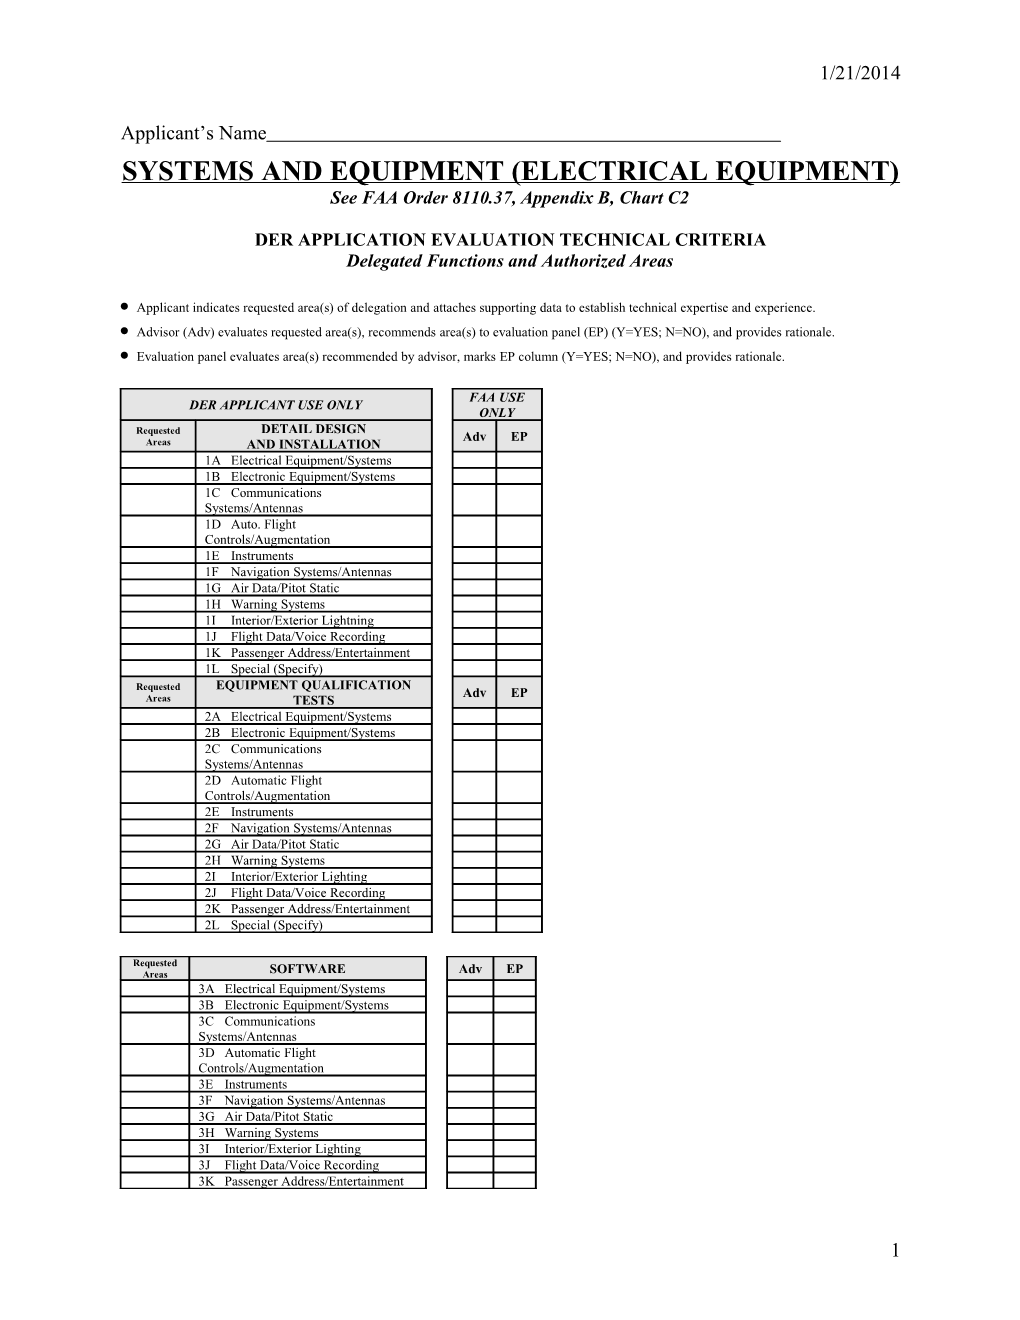 Authorized Functions & Technical Criteria: Electrical Systems